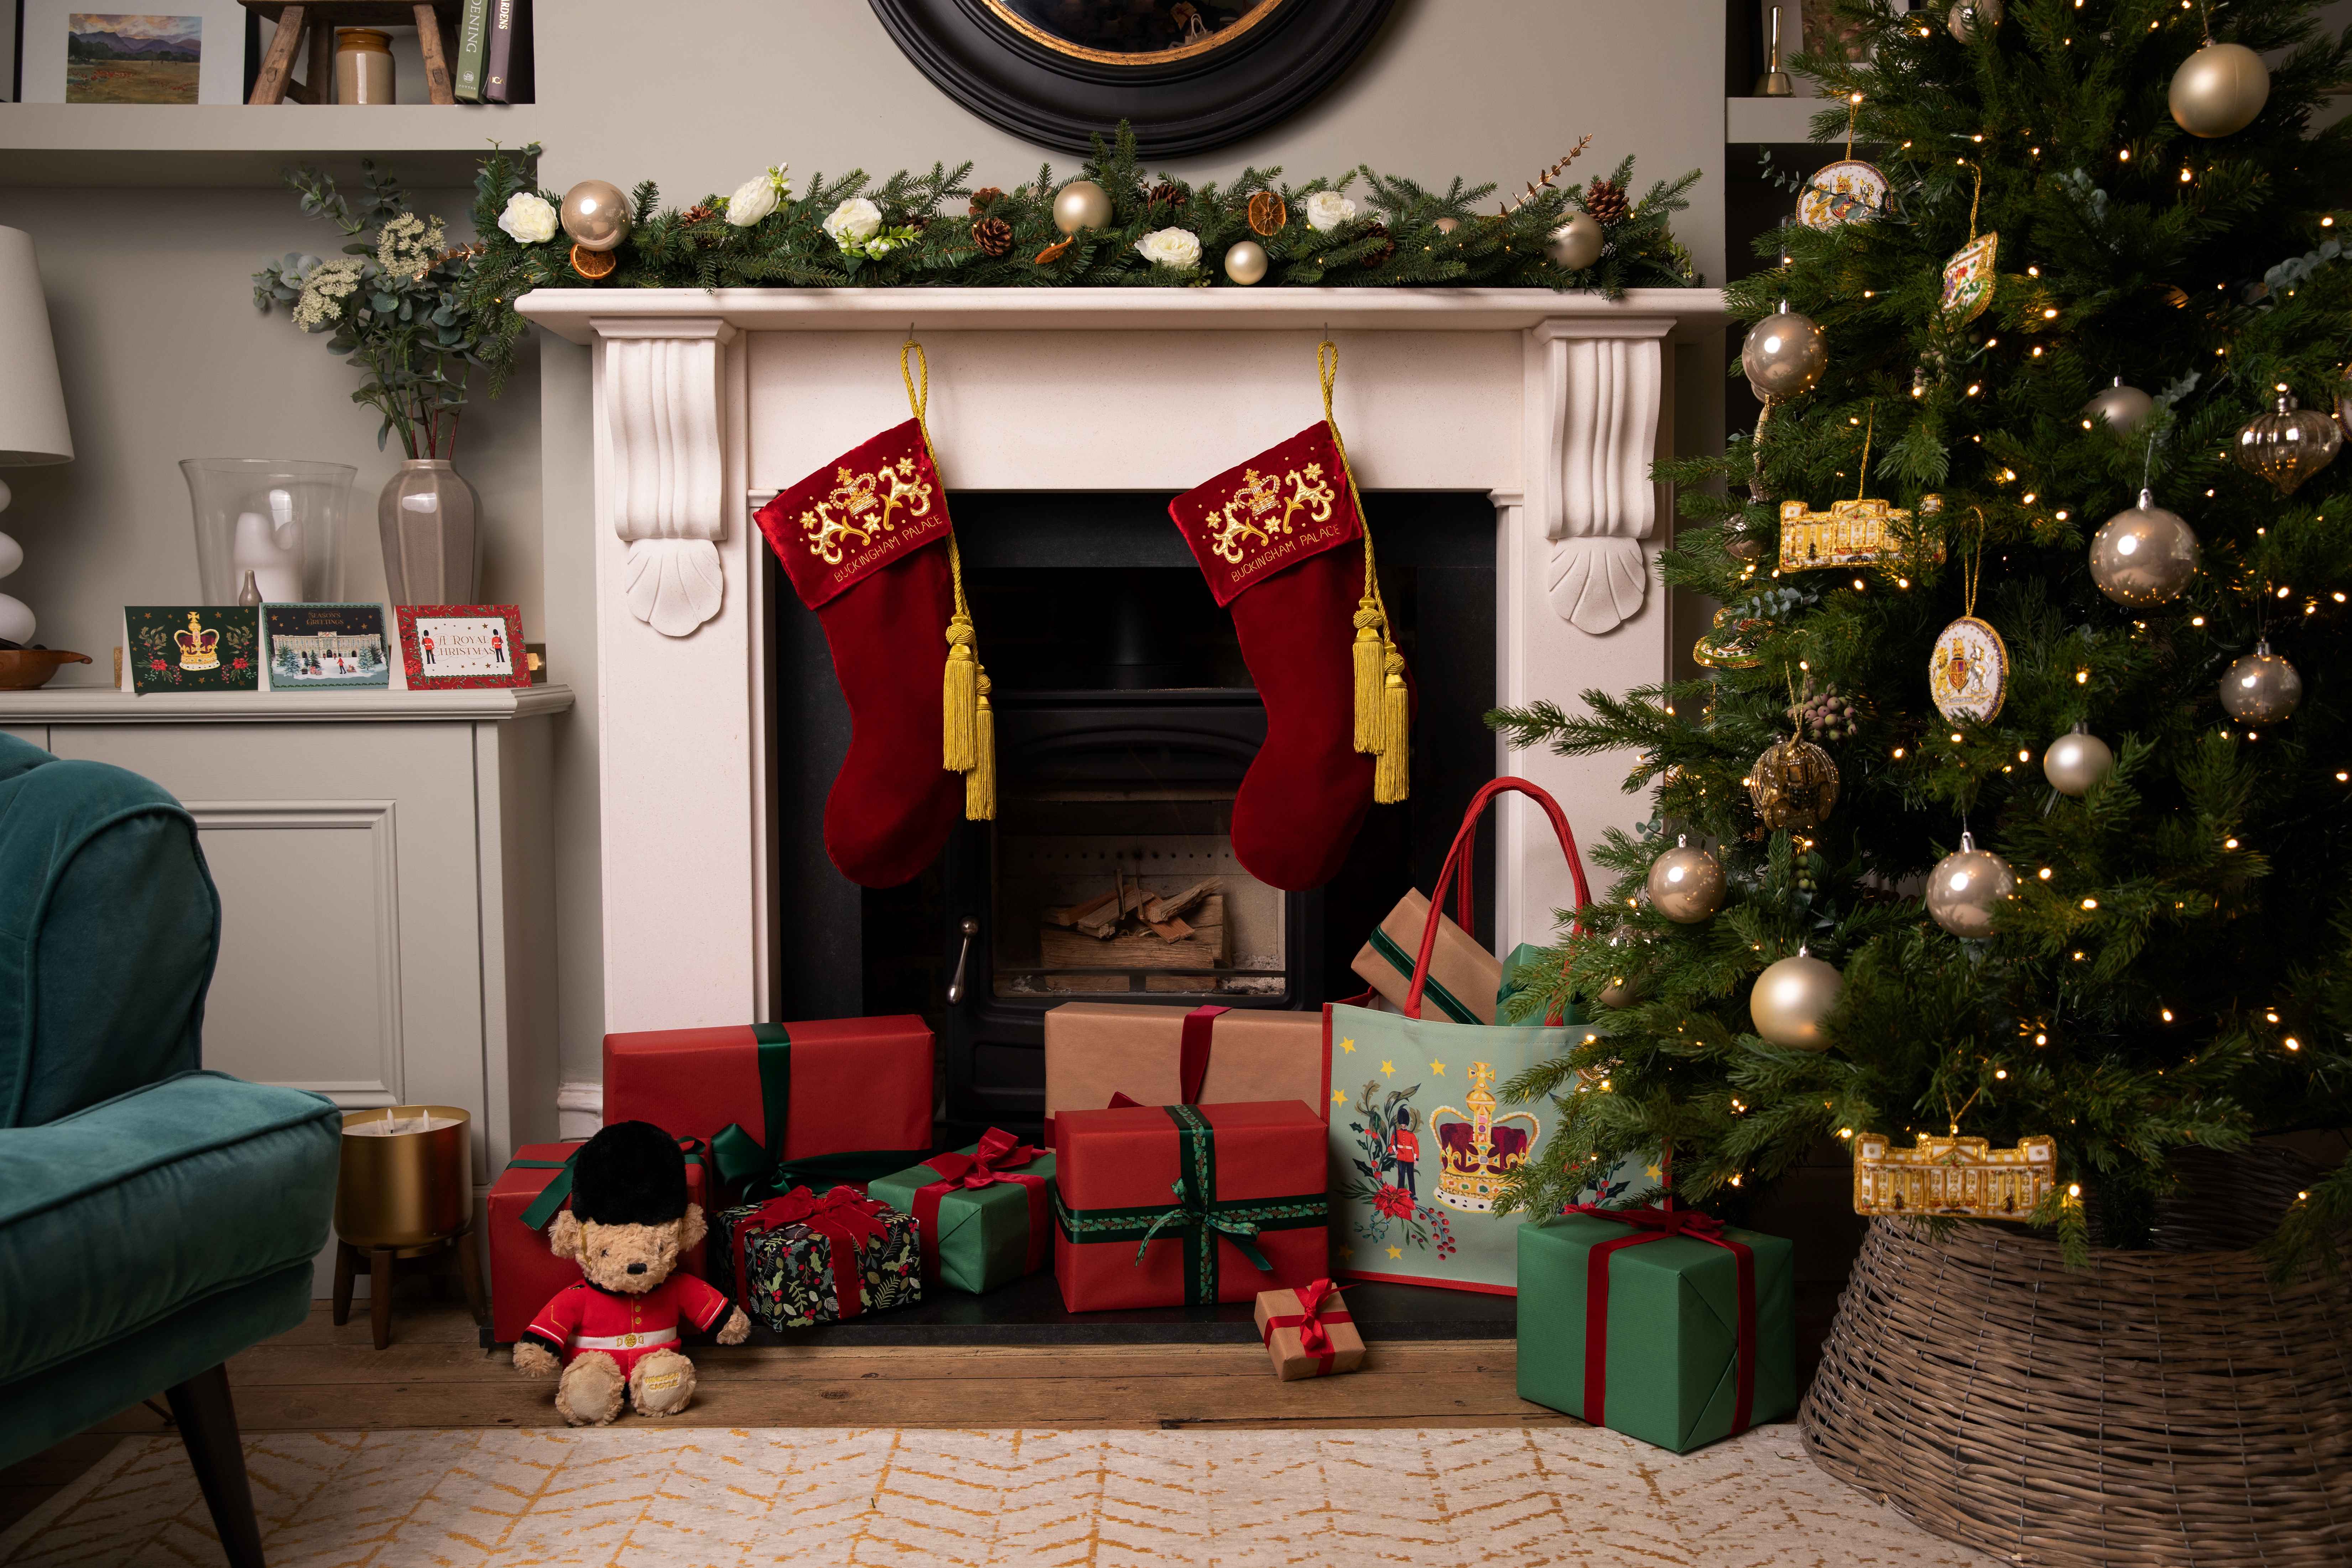 Red Velvet Christmas Stockings hang above a fireplace